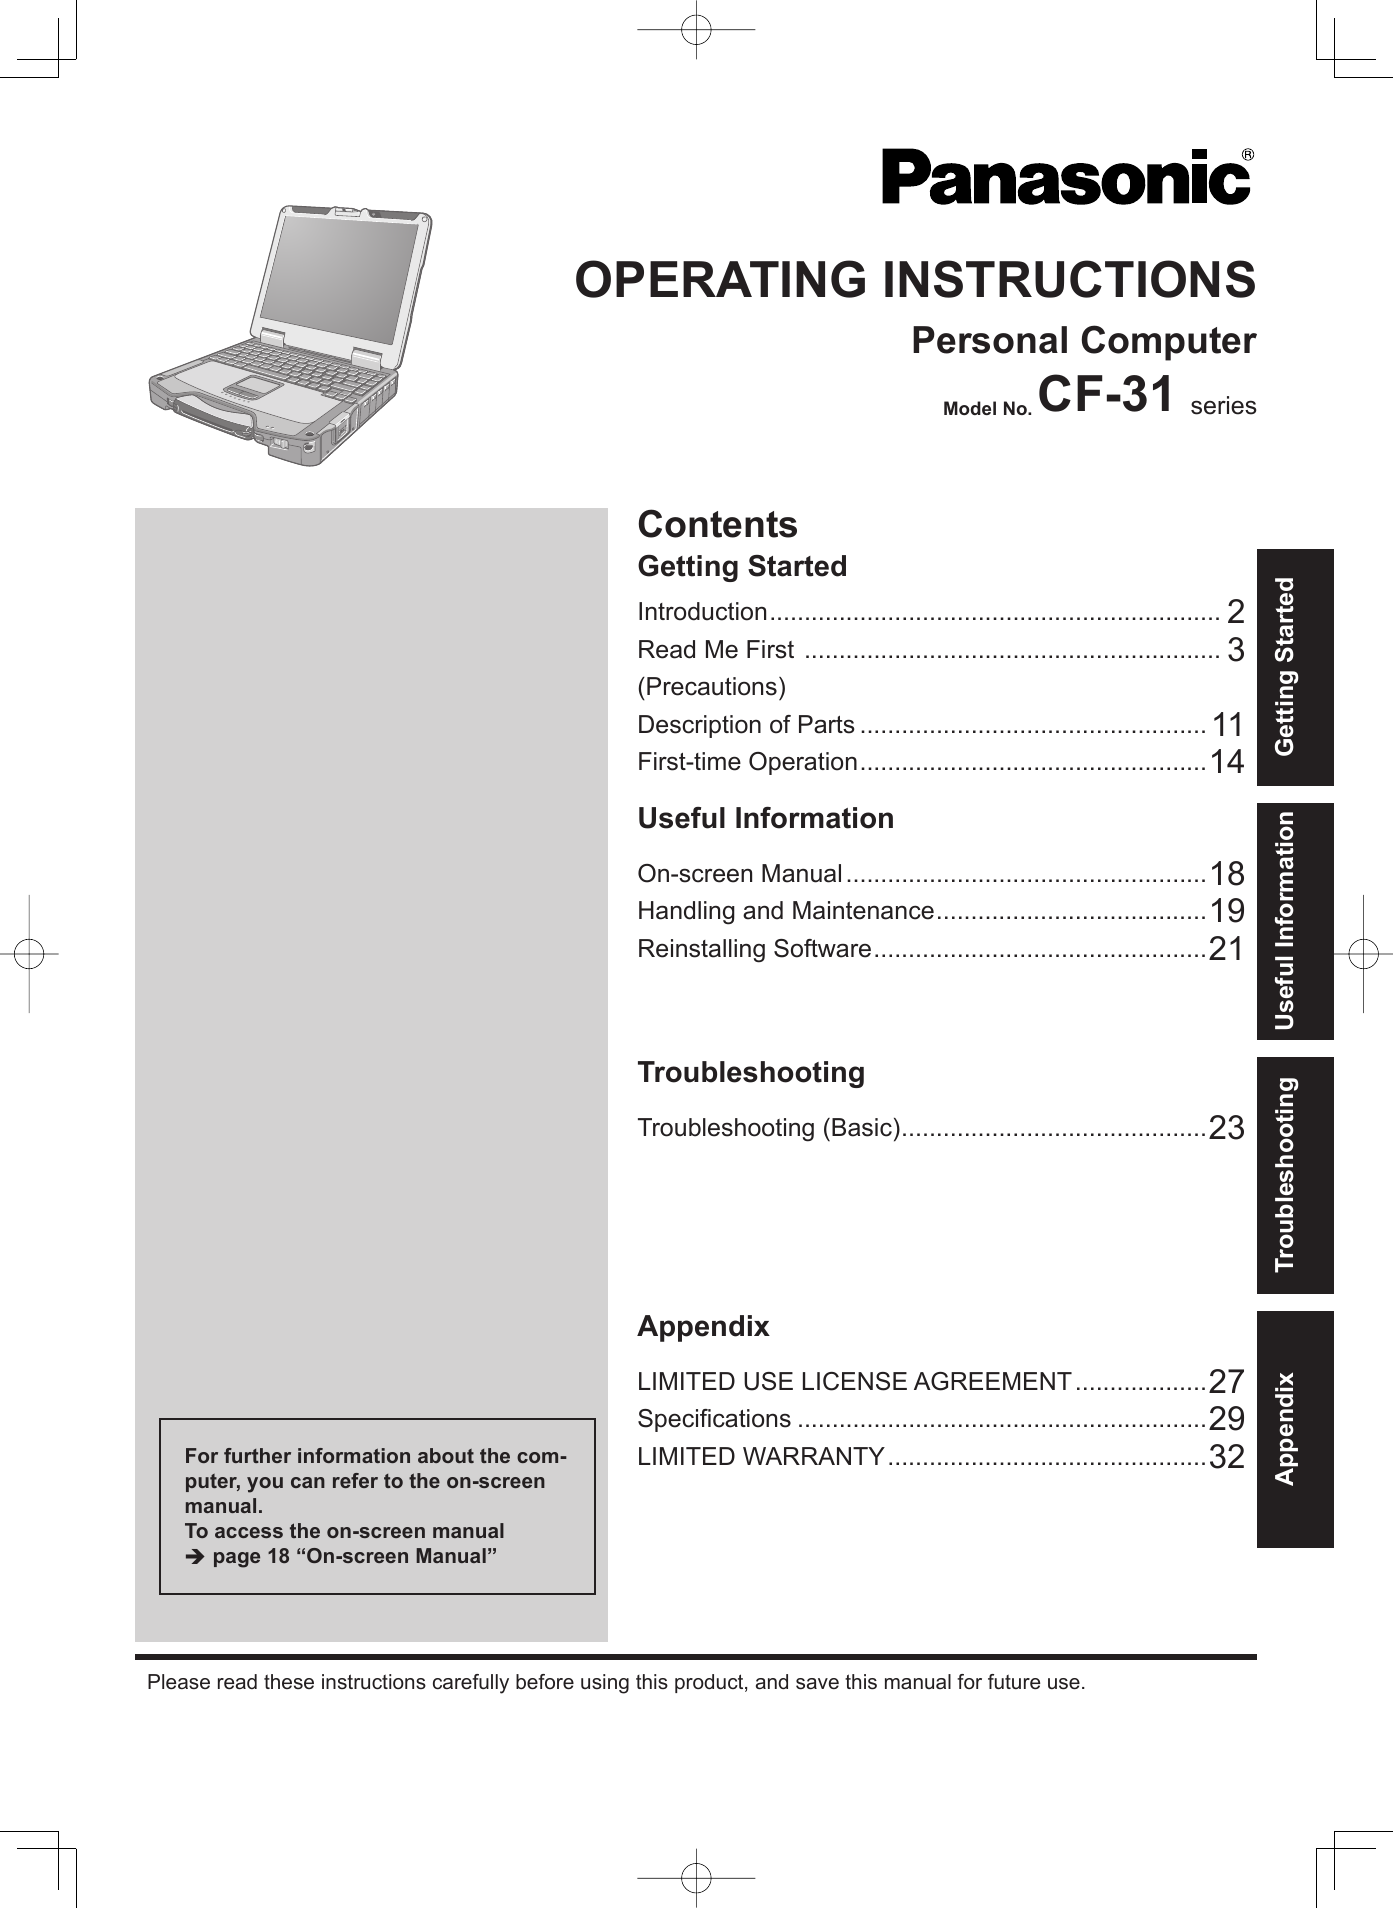 ContentsGetting StartedOPERATING INSTRUCTIONSPersonal ComputerModel No. CF-31 seriesIntroduction ................................................................. 2Read Me First  ............................................................ 3(Precautions)Description of Parts .................................................. 11First-time Operation ..................................................14Useful InformationOn-screen Manual ....................................................18Handling and Maintenance .......................................19Reinstalling Software ................................................21TroubleshootingTroubleshooting (Basic) ............................................23AppendixLIMITED USE LICENSE AGREEMENT ...................27Speciﬁ cations ...........................................................29LIMITED WARRANTY ..............................................32Please read these instructions carefully before using this product, and save this manual for future use.For further information about the com-puter, you can refer to the on-screen manual.To access the on-screen manual  page 18 “On-screen Manual”Getting StartedUseful InformationTroubleshootingAppendix